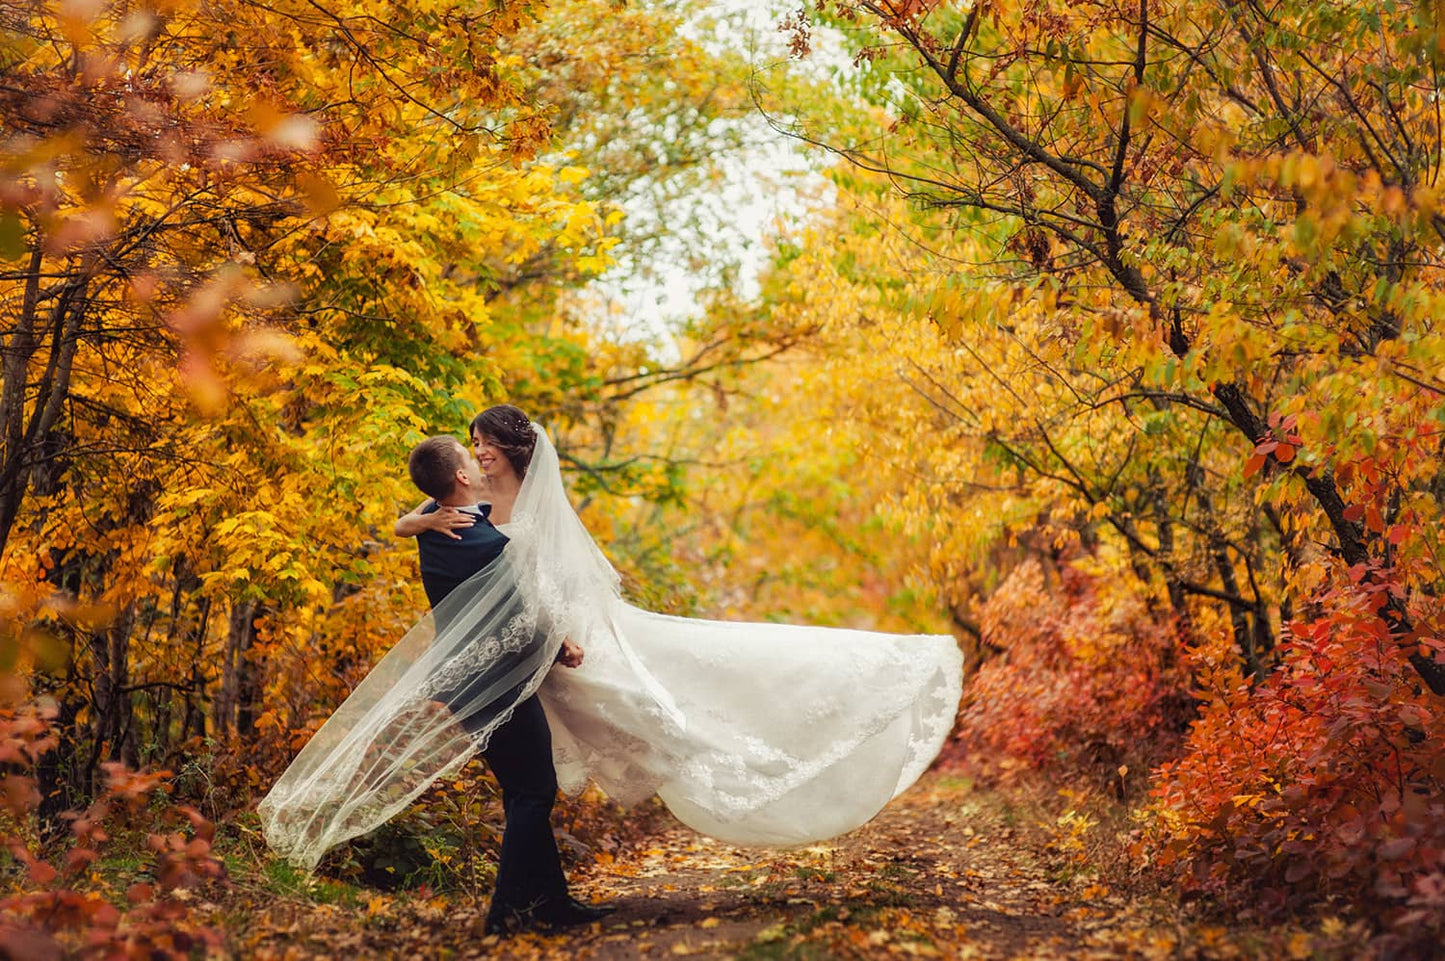 Newlywed couple. One lifitng the other up into the air. Standing in a forest path with vibrant fall leaves in the background.